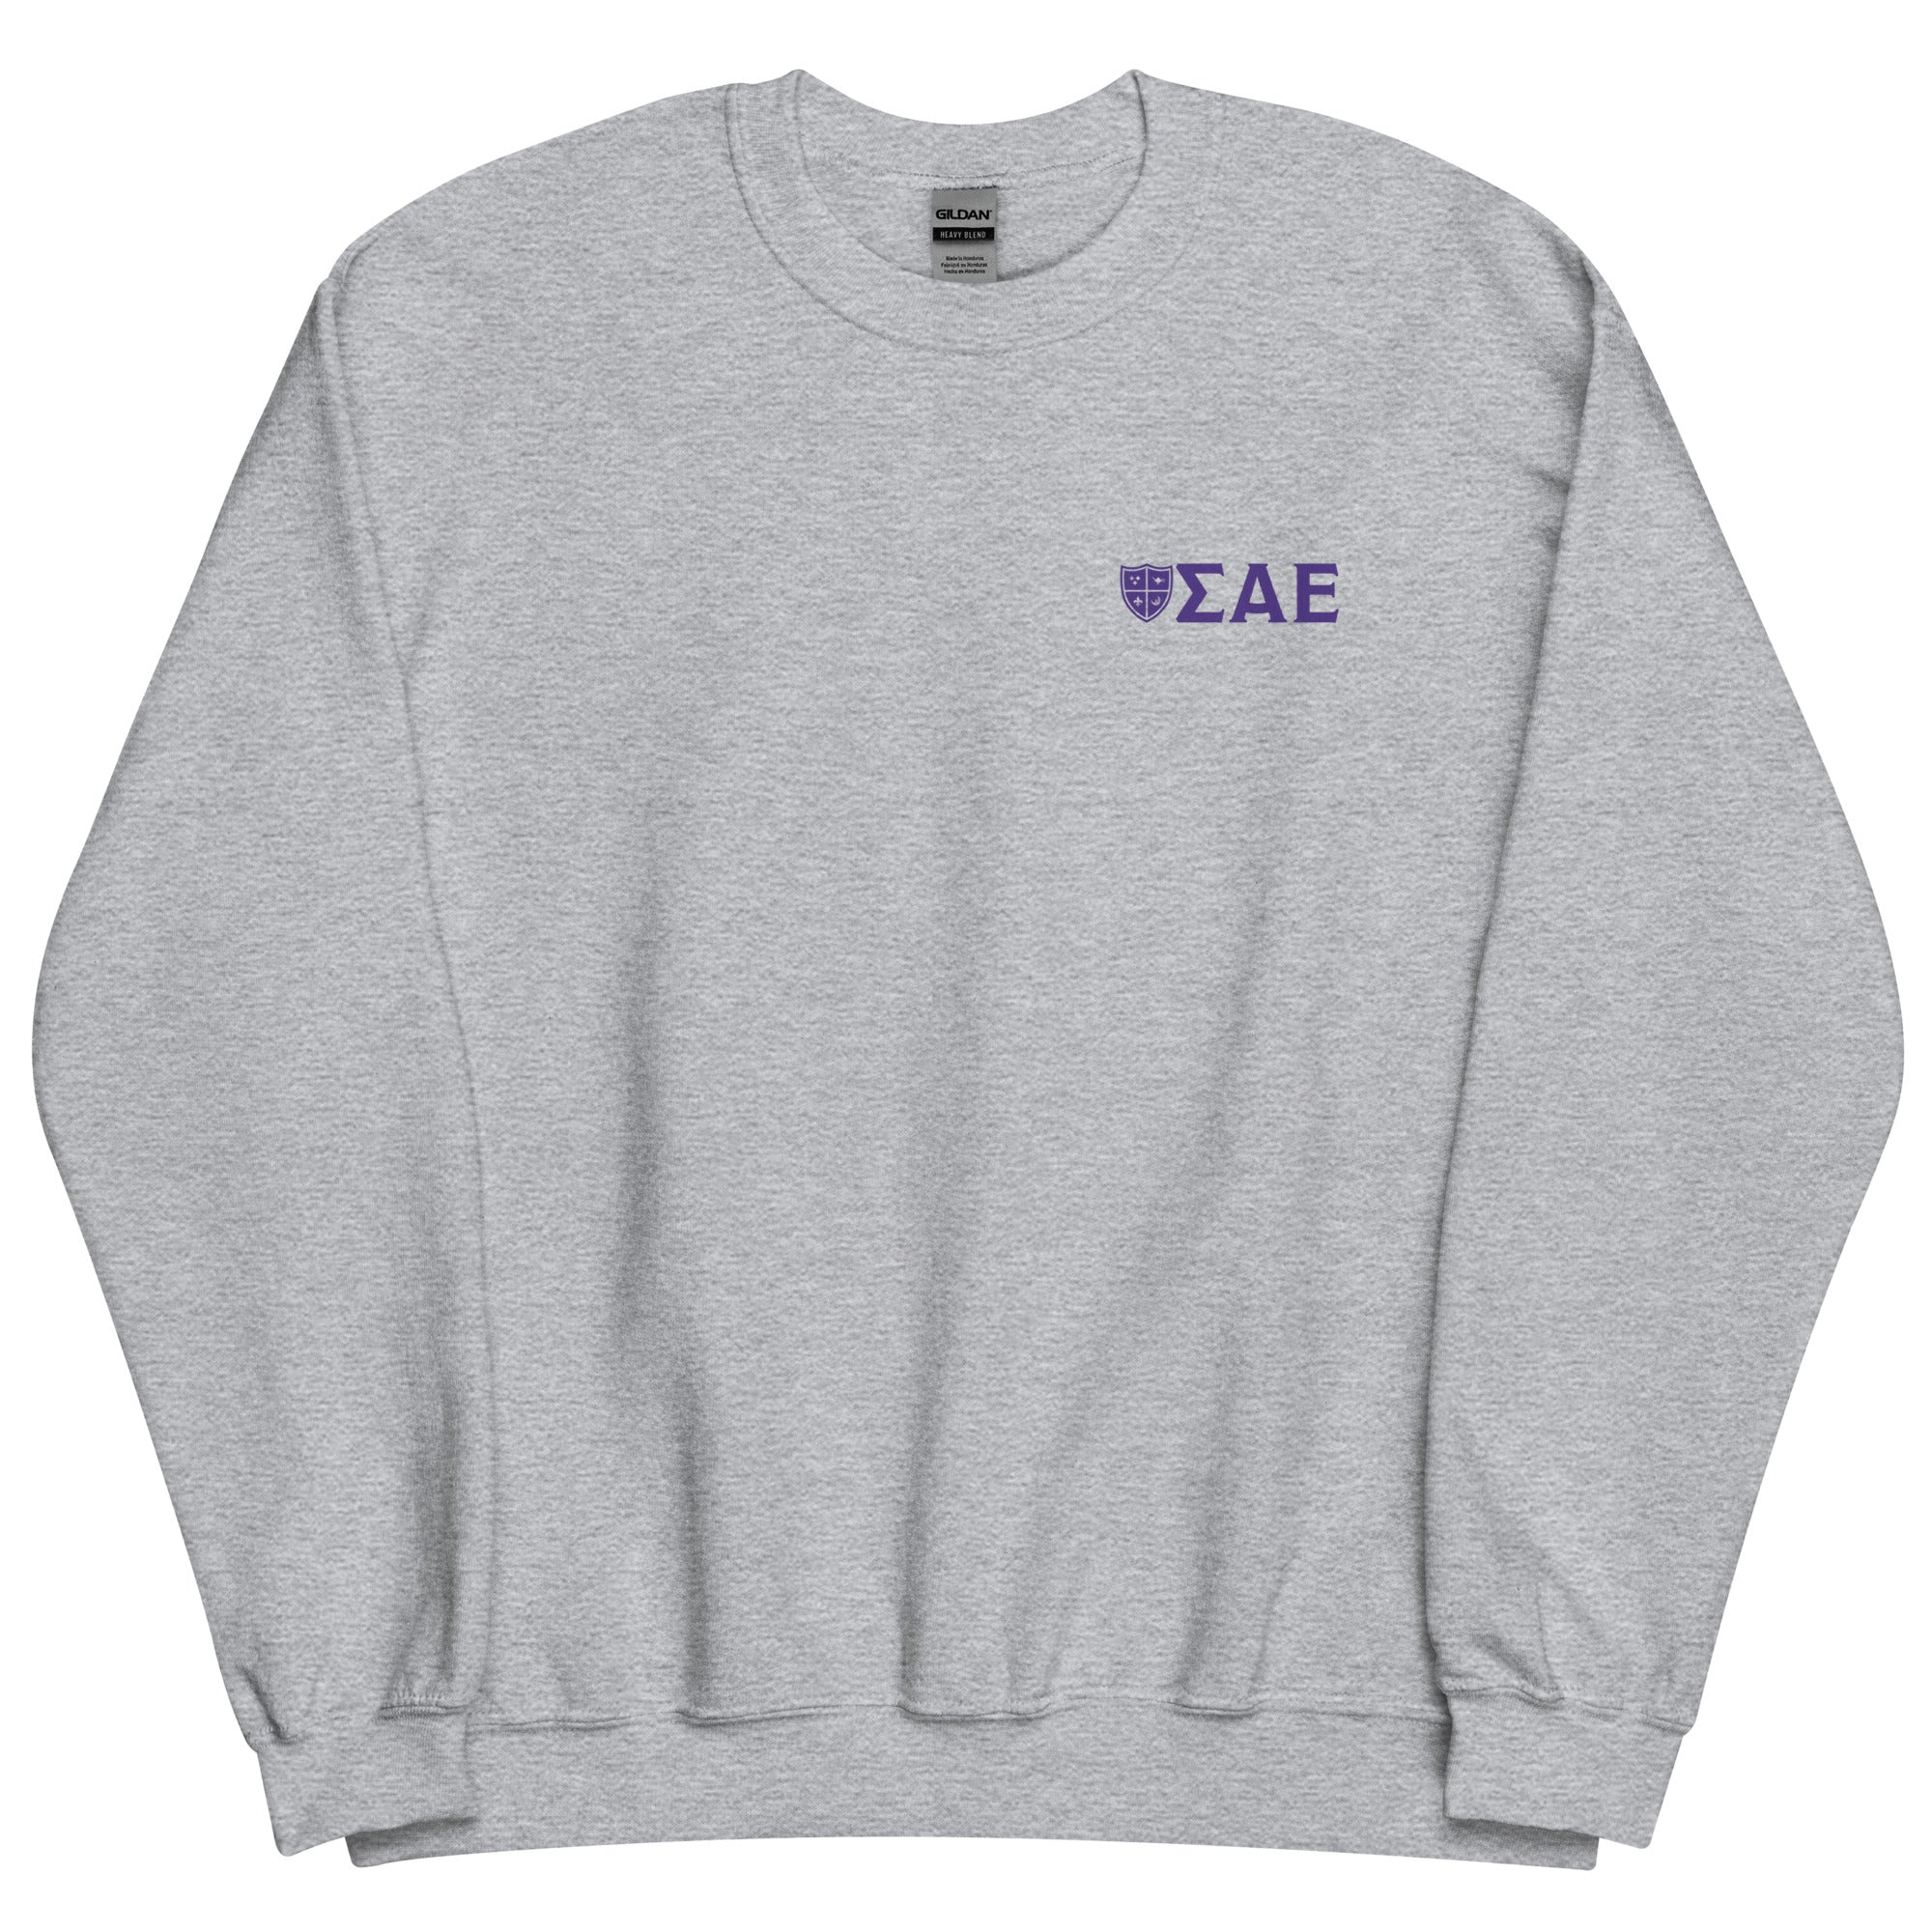 LIMITED RELEASE: SAE Back to School Crew - The Sigma Alpha Epsilon Store